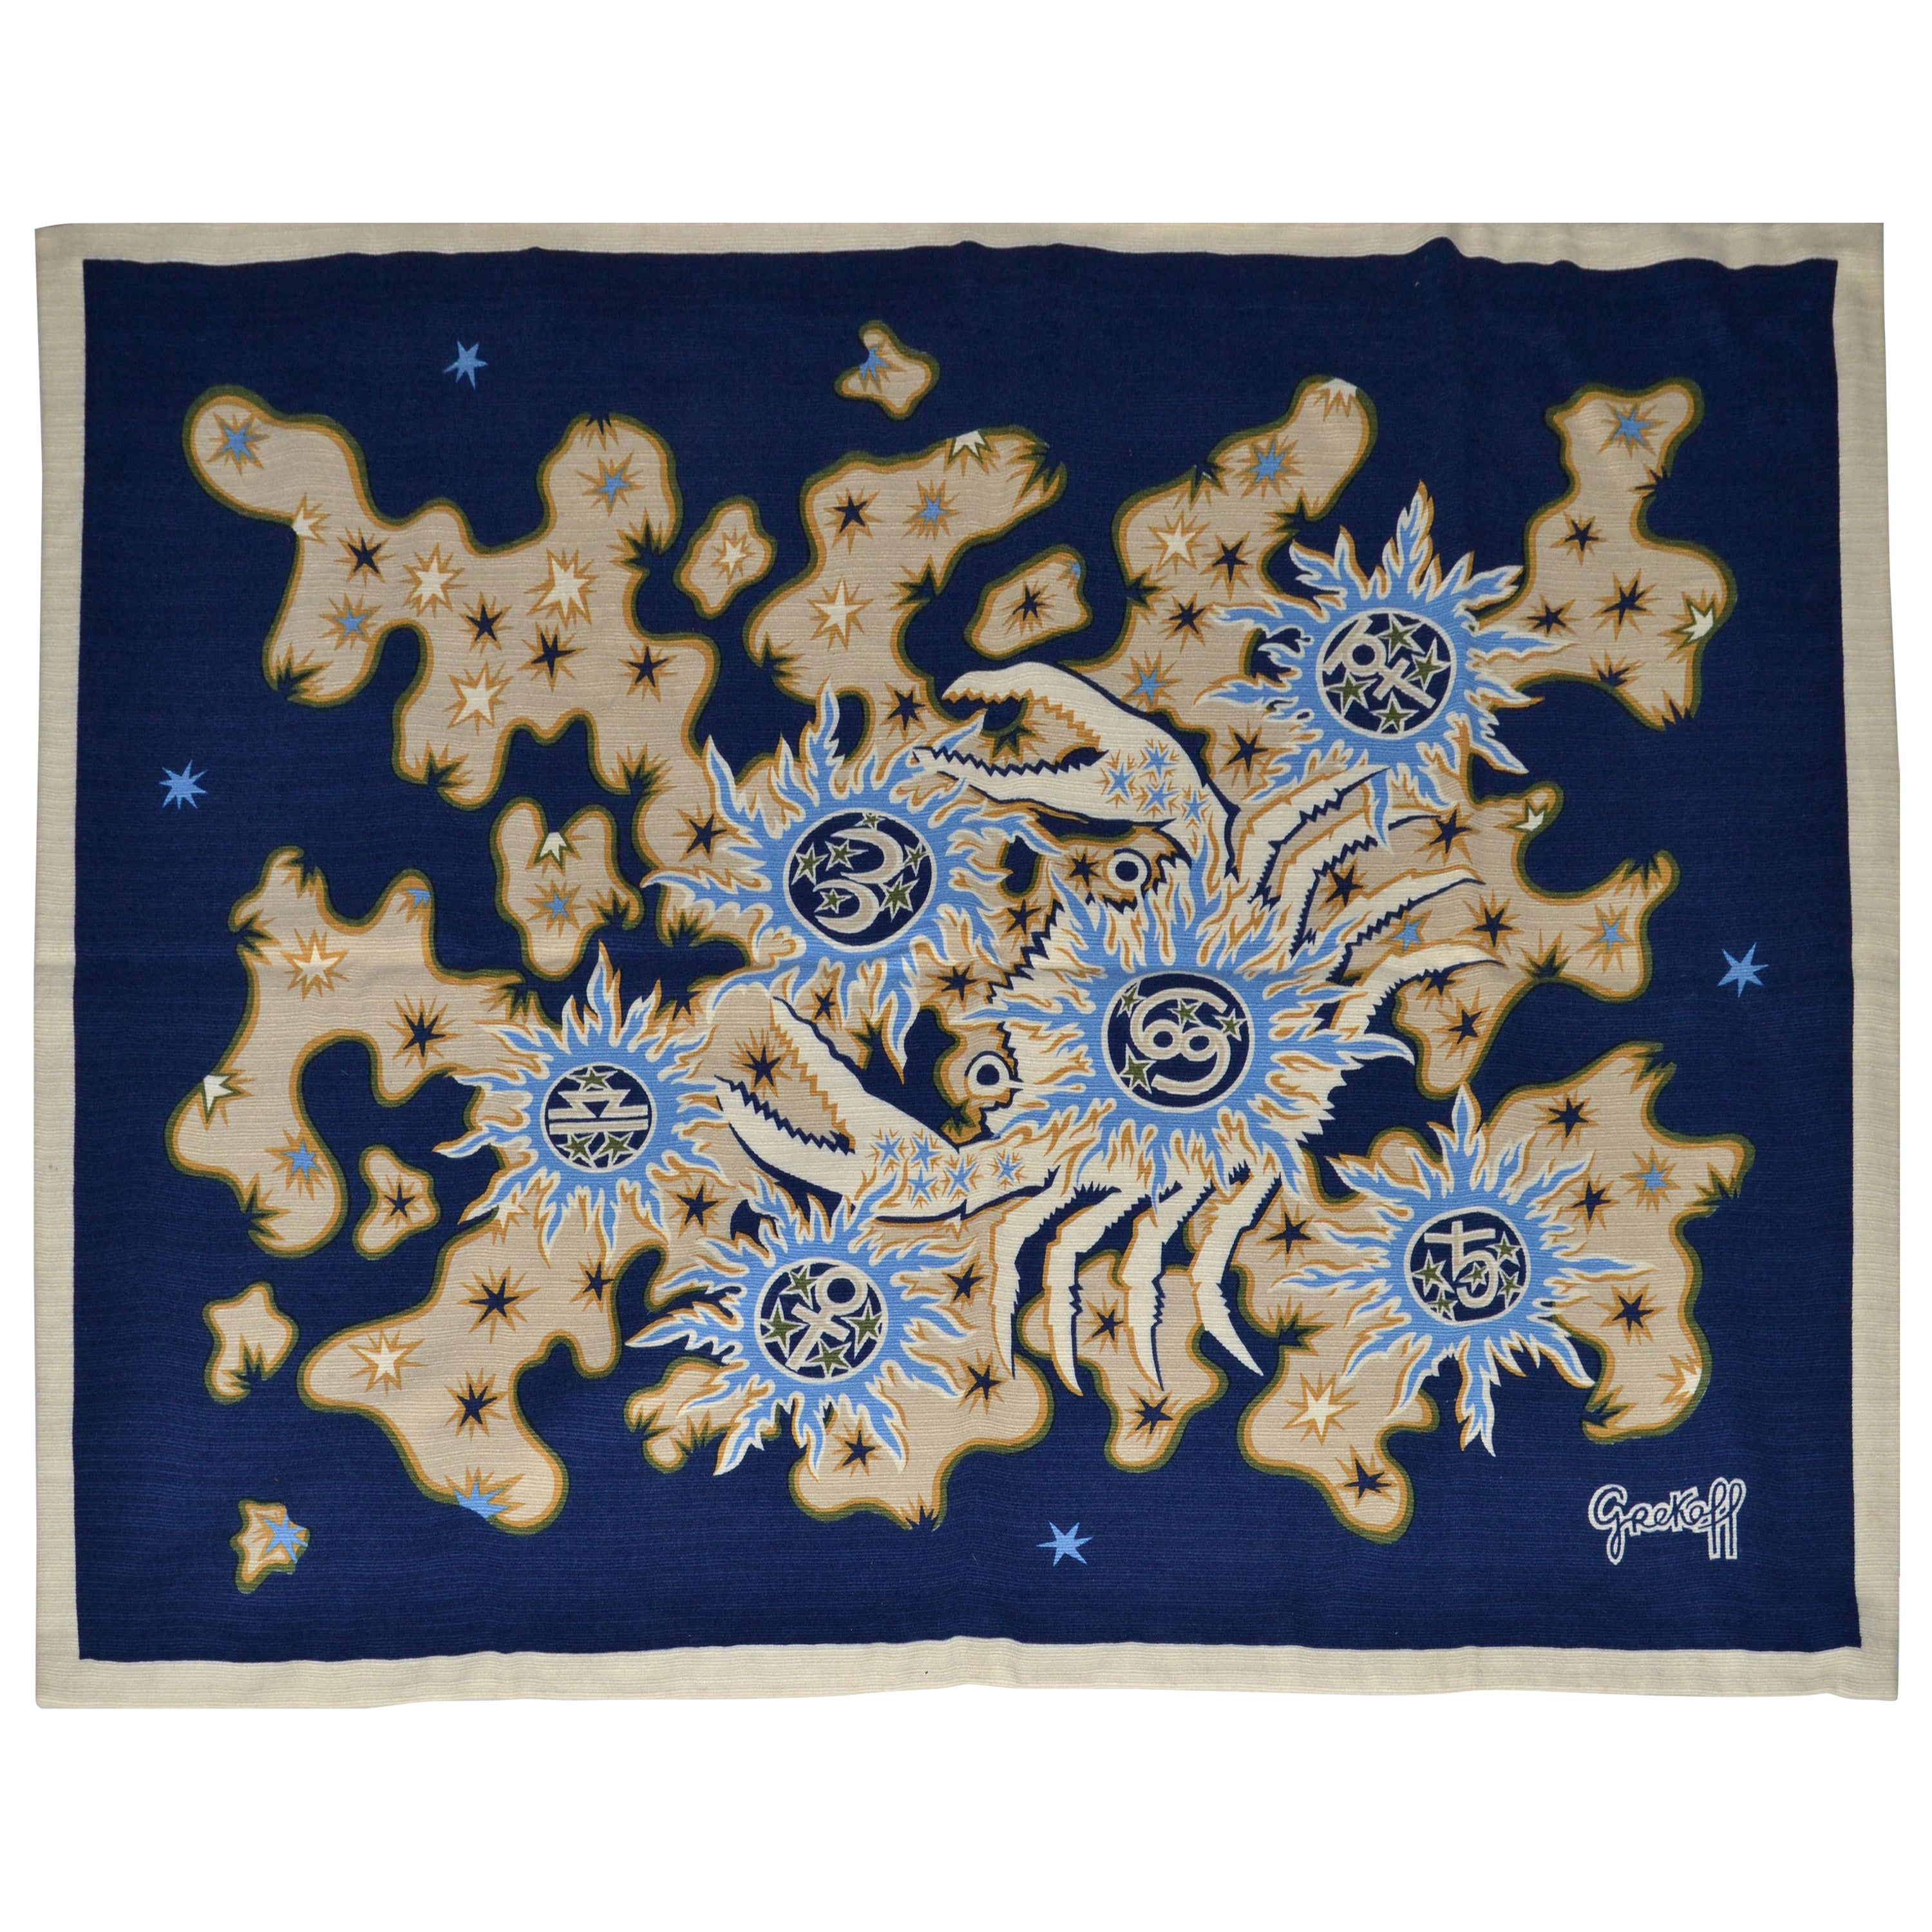 Original Elie Grekoff Tapestry Zodiac Cancer Wool Paris Proof of Authenticity For Sale